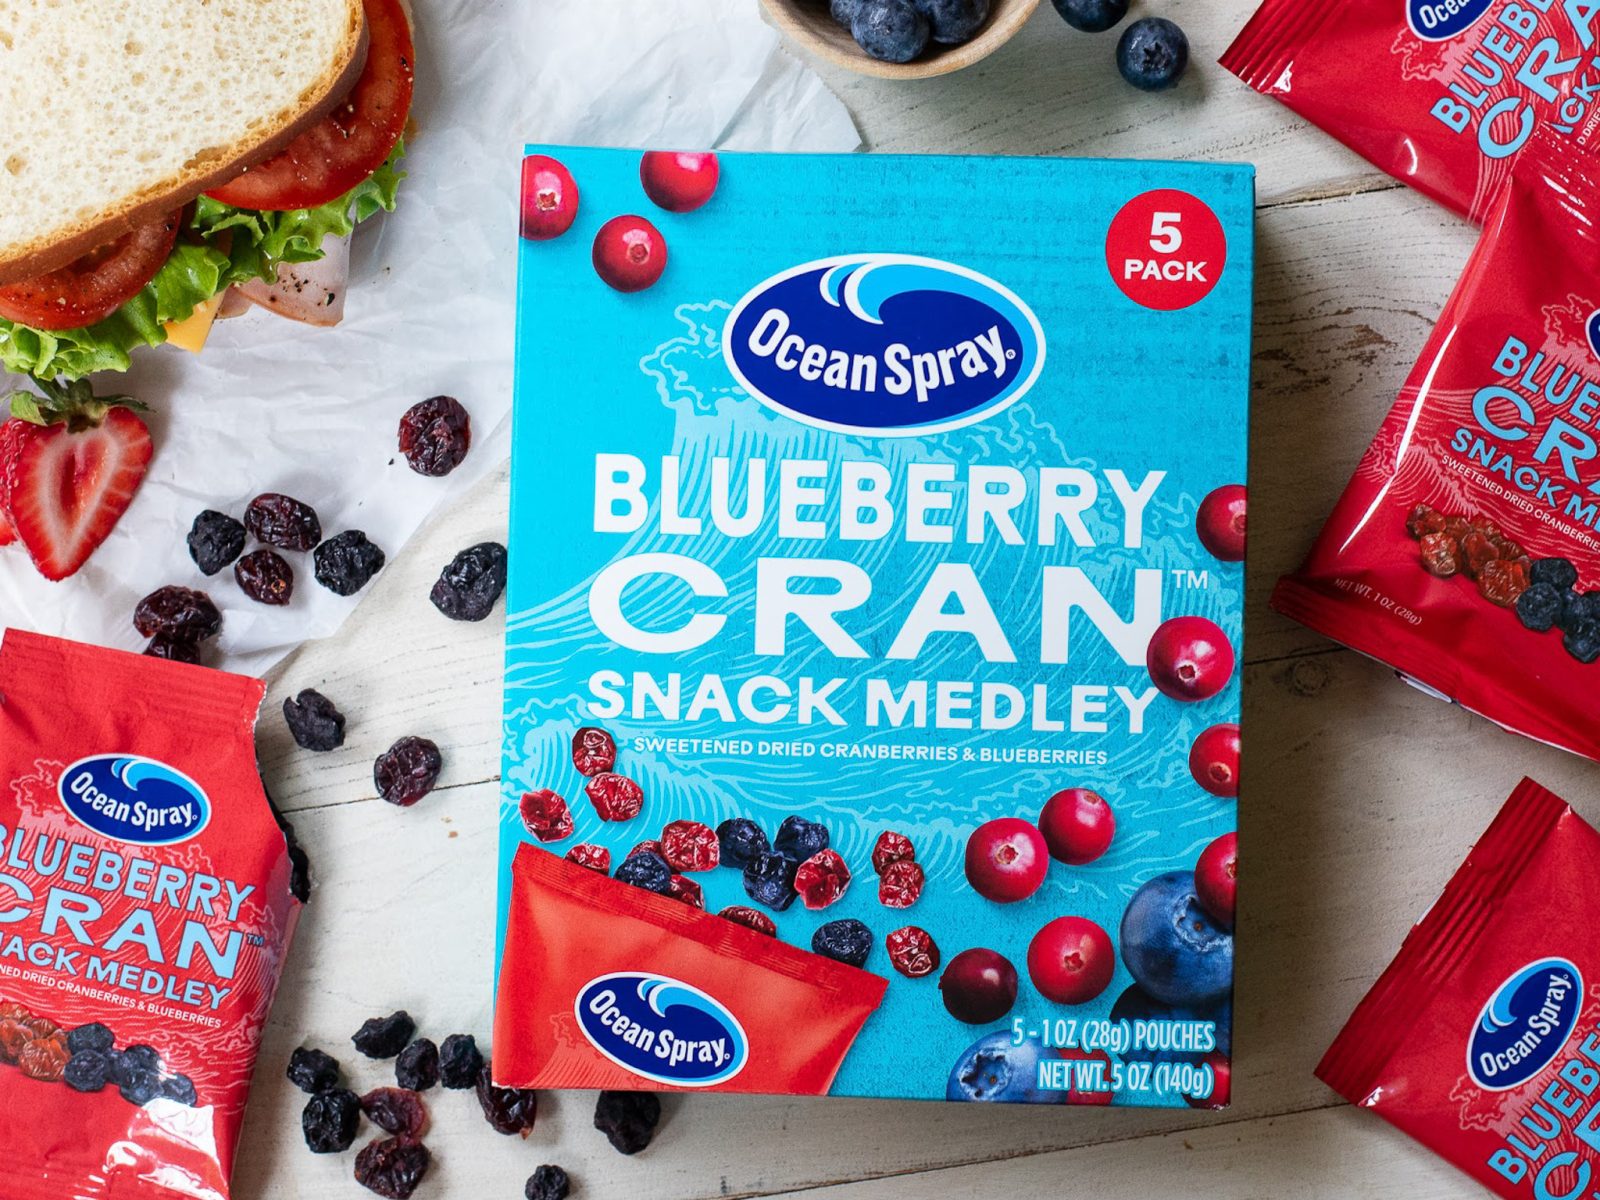 Get The Boxes Of Ocean Spray Snack Medley For Just $2.50 At Kroger – Half Price